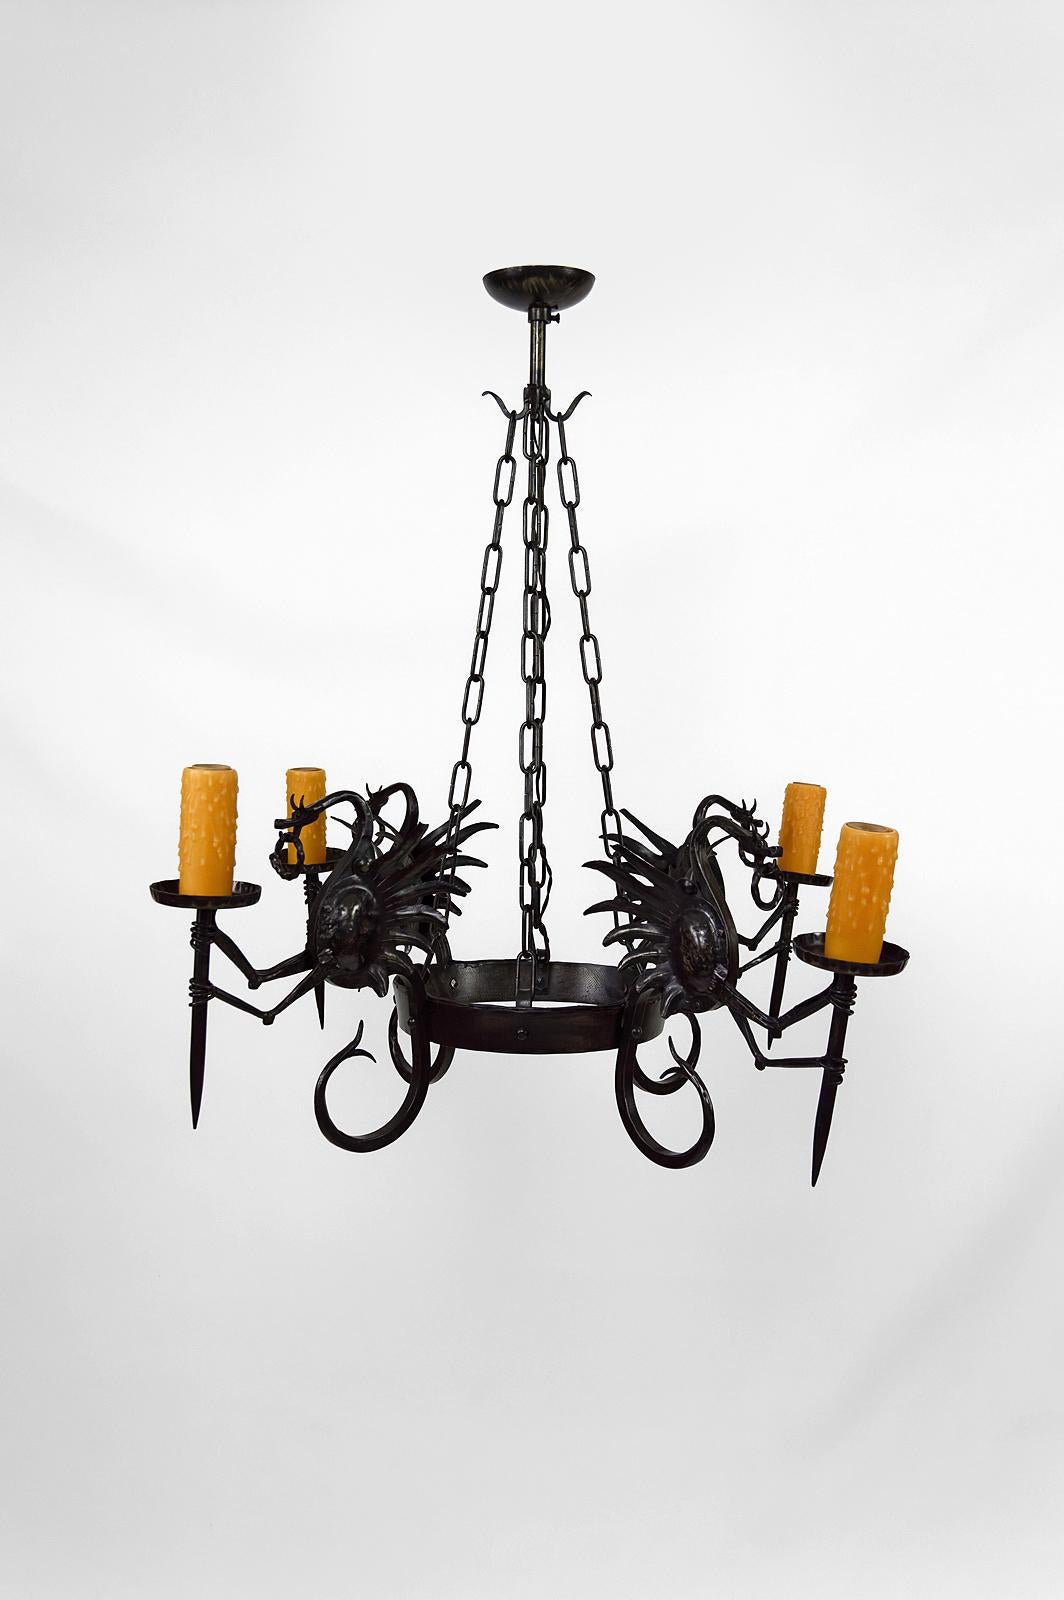 Superb wrought iron chandelier / pendant composed of 4 winged dragons each holding a torch / torchiere.

Good quality of manufacture: well-made subjects, beautiful patina of the metal.

Neo-Gothic / Art Nouveau / Liberty style, Italy, circa